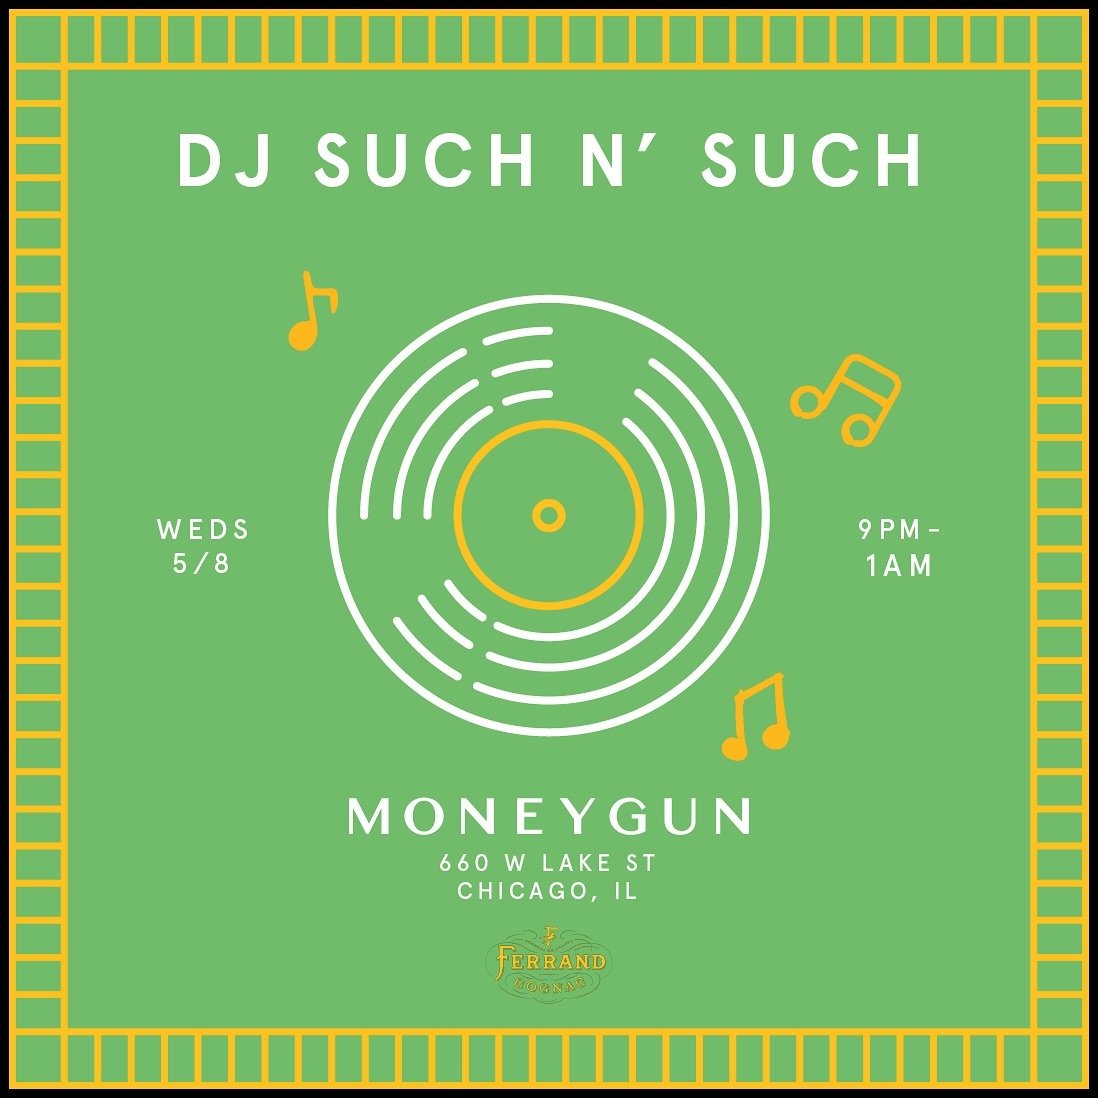 Come start the month of May right with us over at MONEYGUN. Welcoming back @suchordie spinning all the great tunes to make the vibes just right. 

Happening Wednesday May 8th, with the set going from 9pm-1am. 

Join us for great music, delicious clas